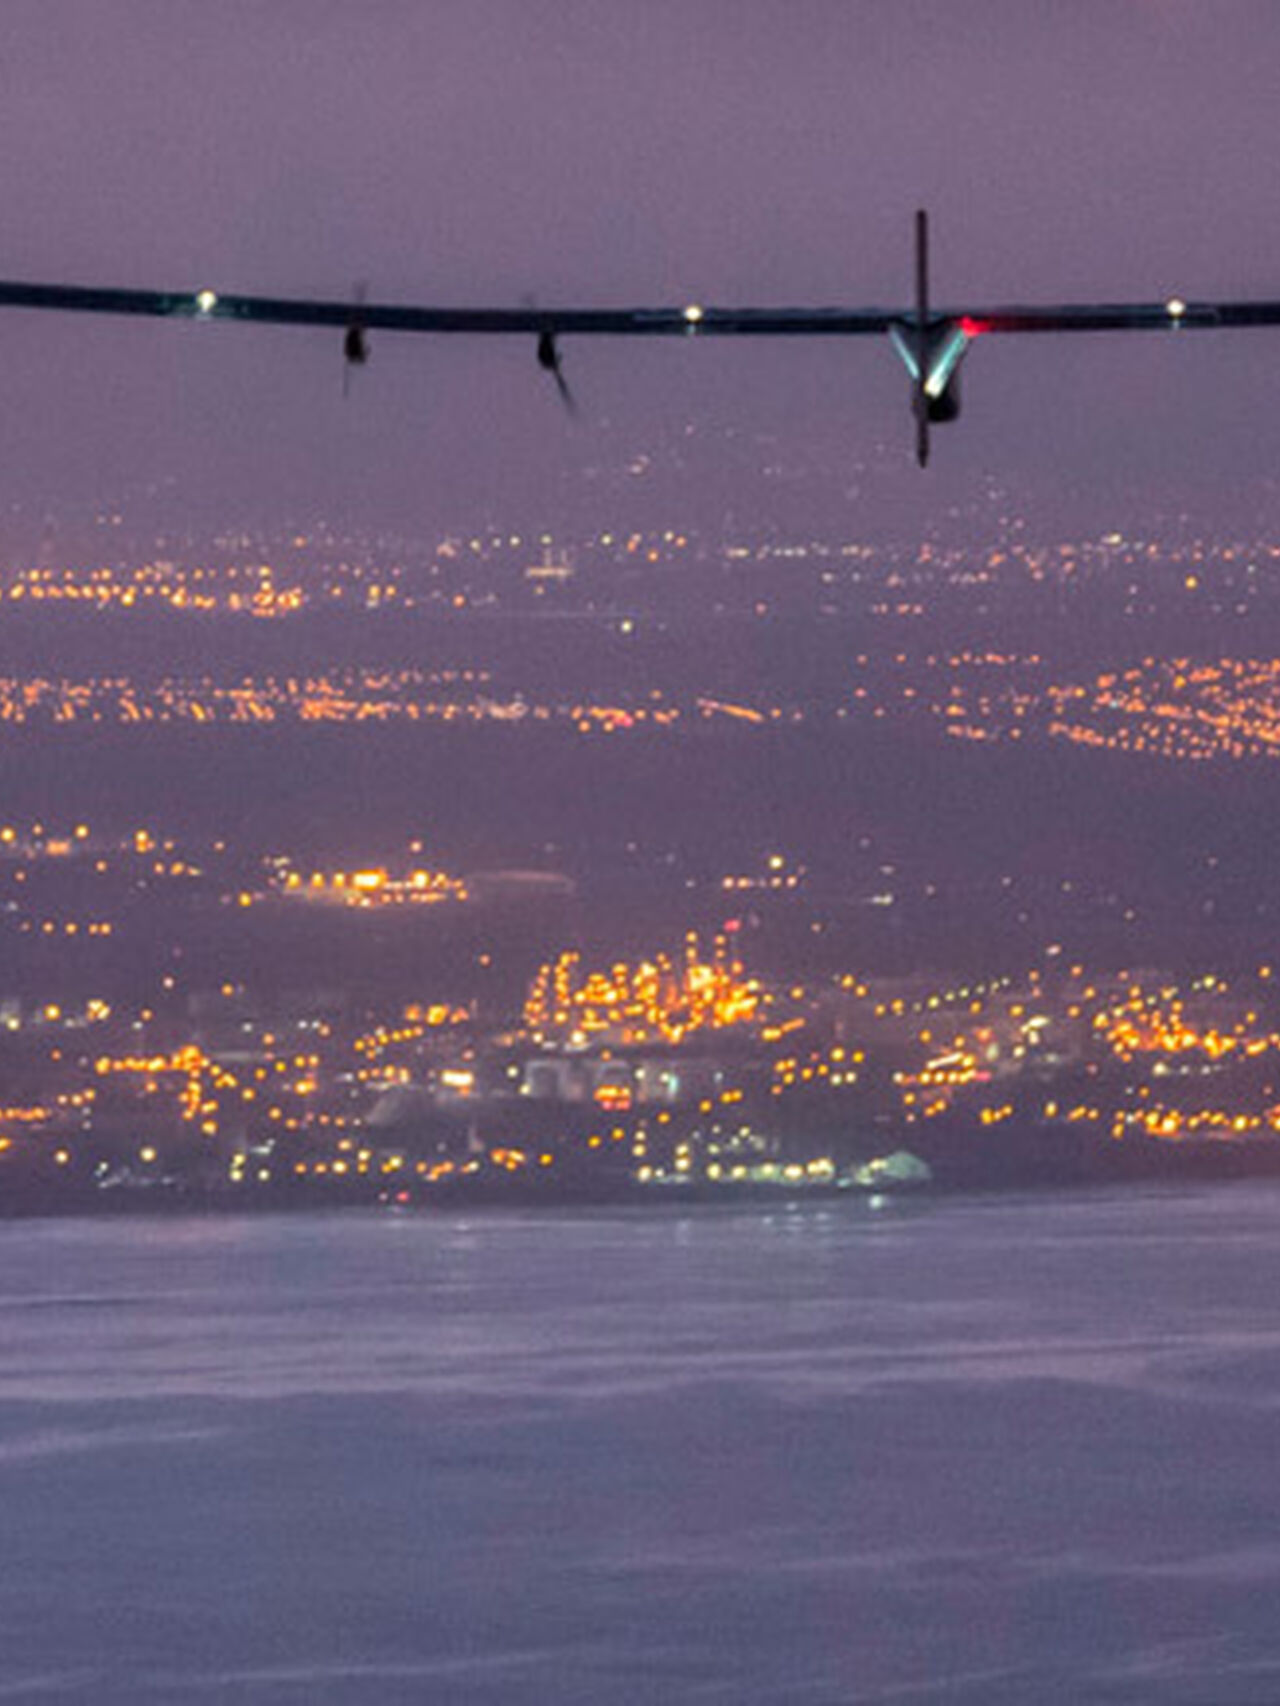 End of the journey: the Solar Impulse 2 aircraft completes the tour of the world with solar energy